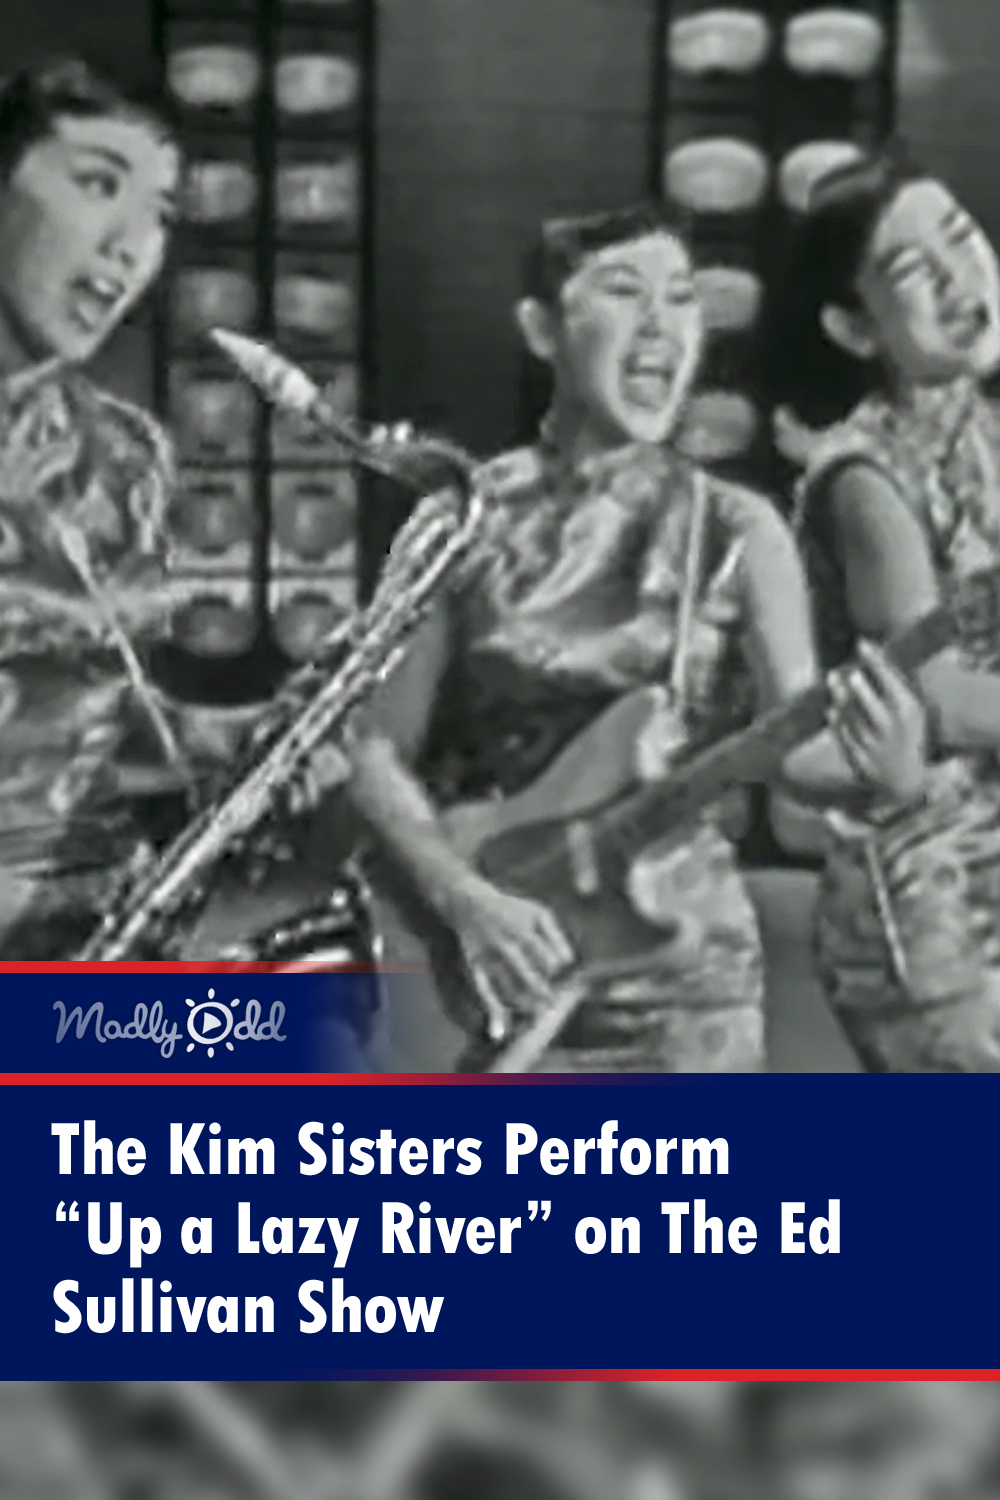 The Kim Sisters Perform “Up a Lazy River” on The Ed Sullivan Show